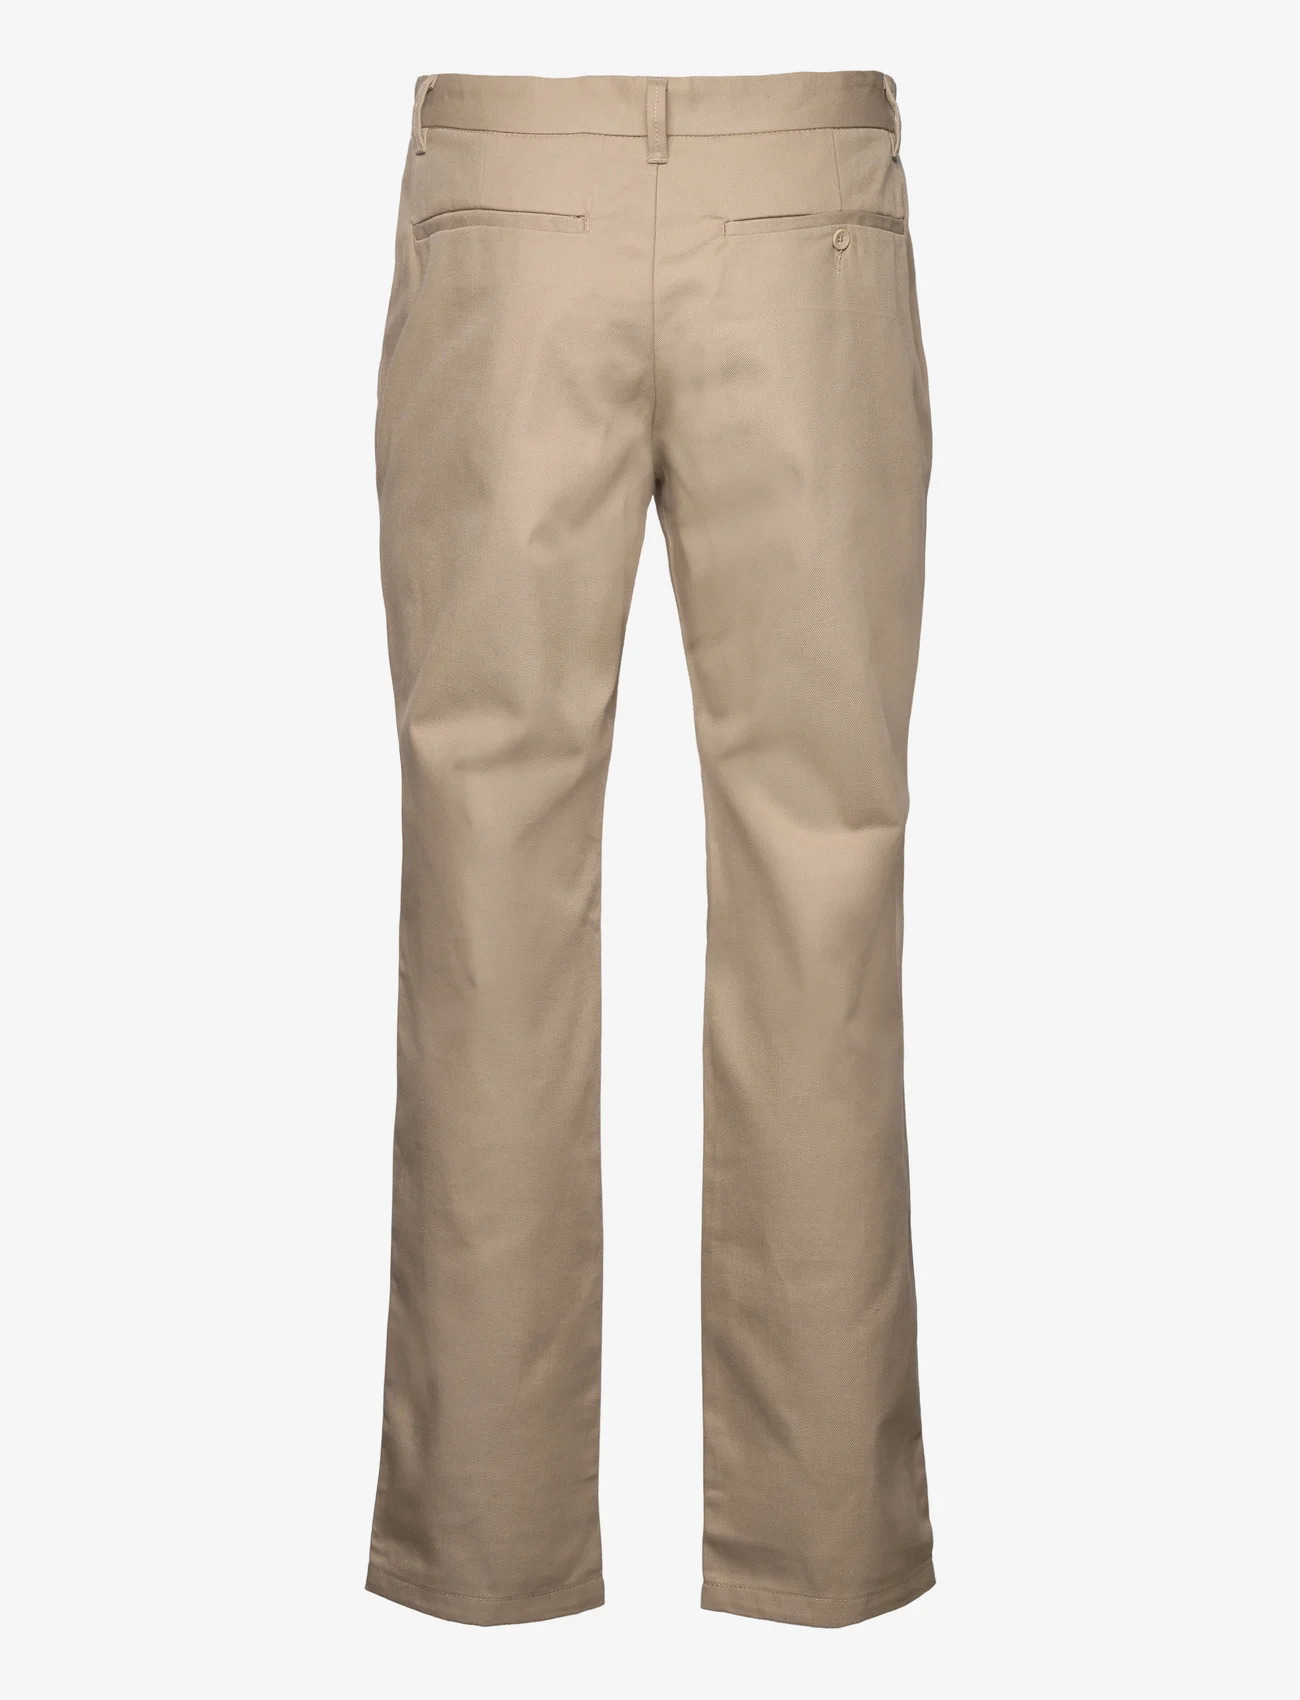 ONLY & SONS - ONSEDGE LOOSE 2905 PANT - chinos - chinchilla - 1